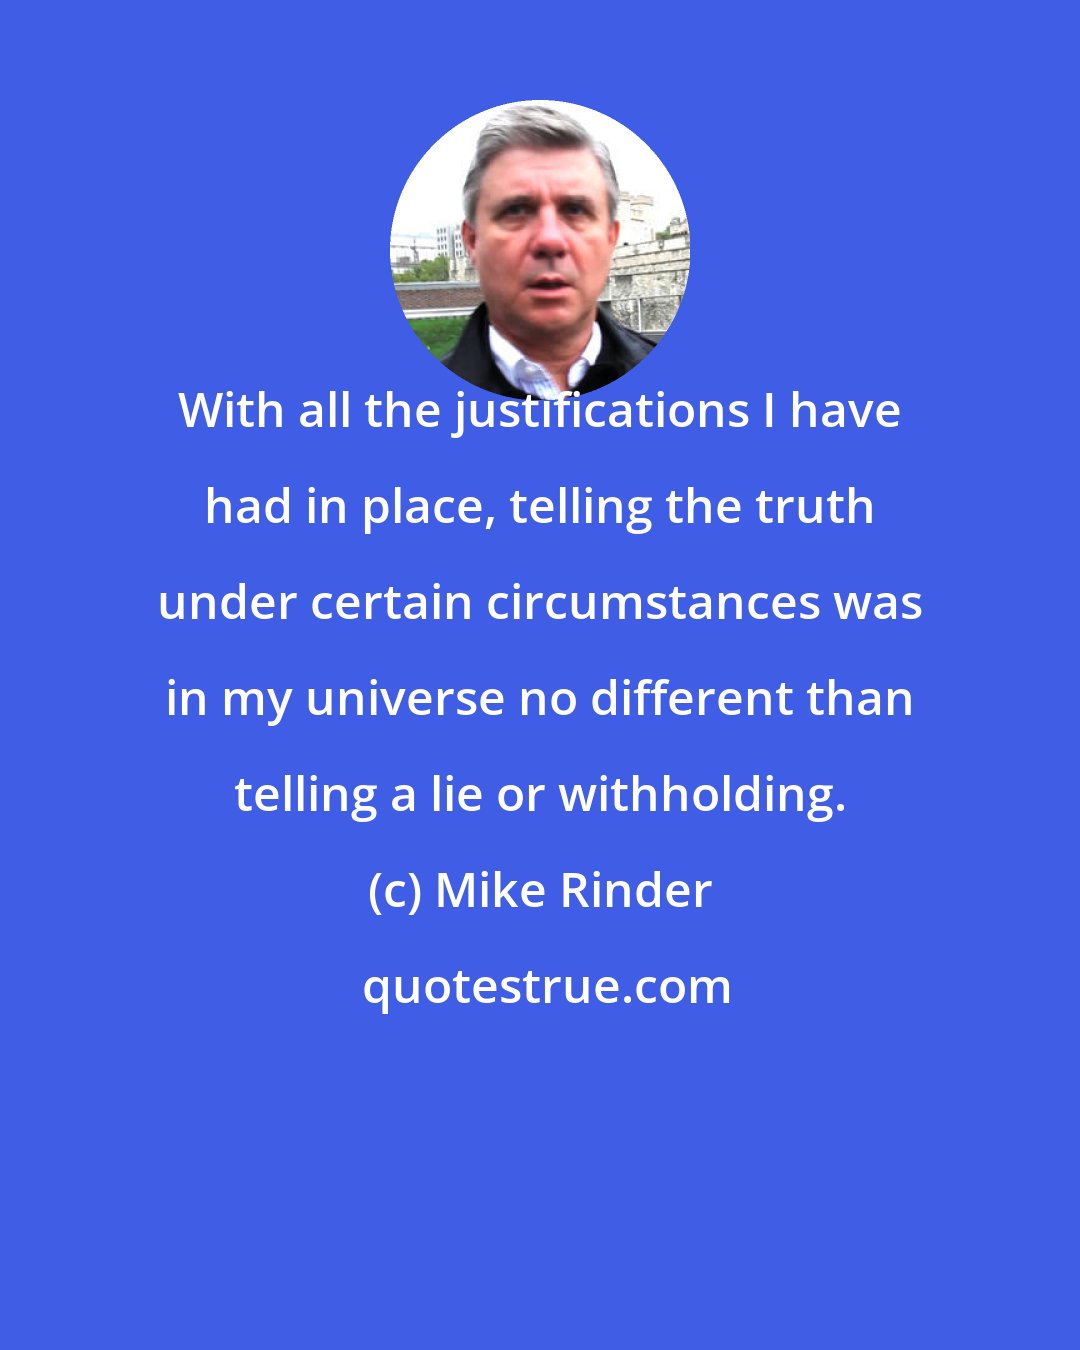 Mike Rinder: With all the justifications I have had in place, telling the truth under certain circumstances was in my universe no different than telling a lie or withholding.